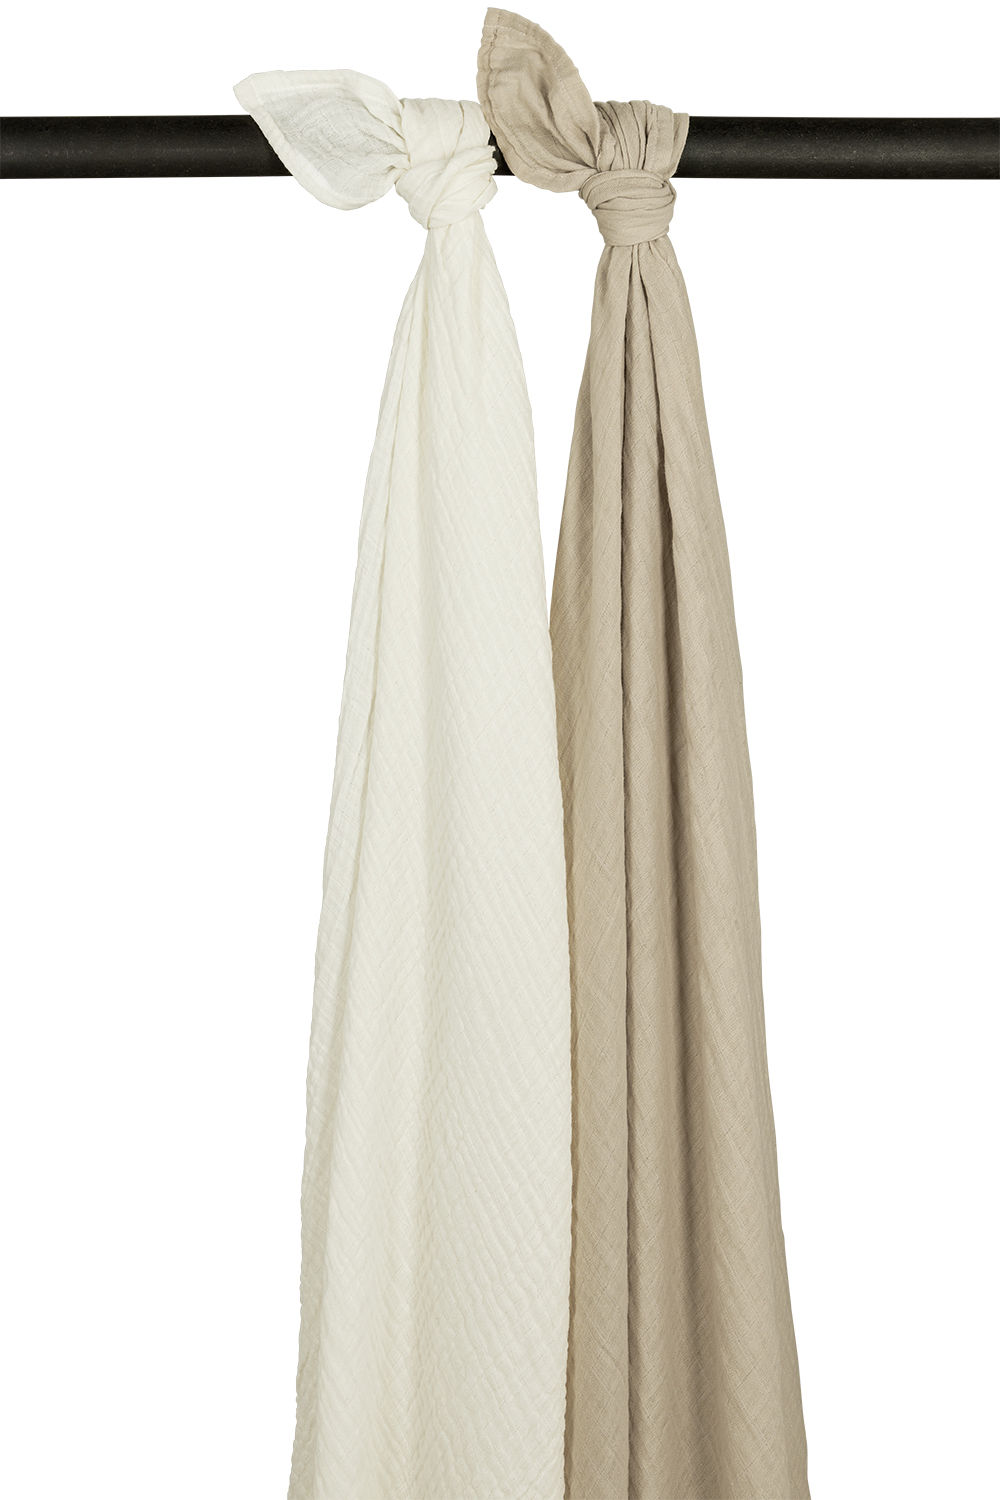 Swaddle 2-pack muslin Uni - offwhite/sand - 120x120cm